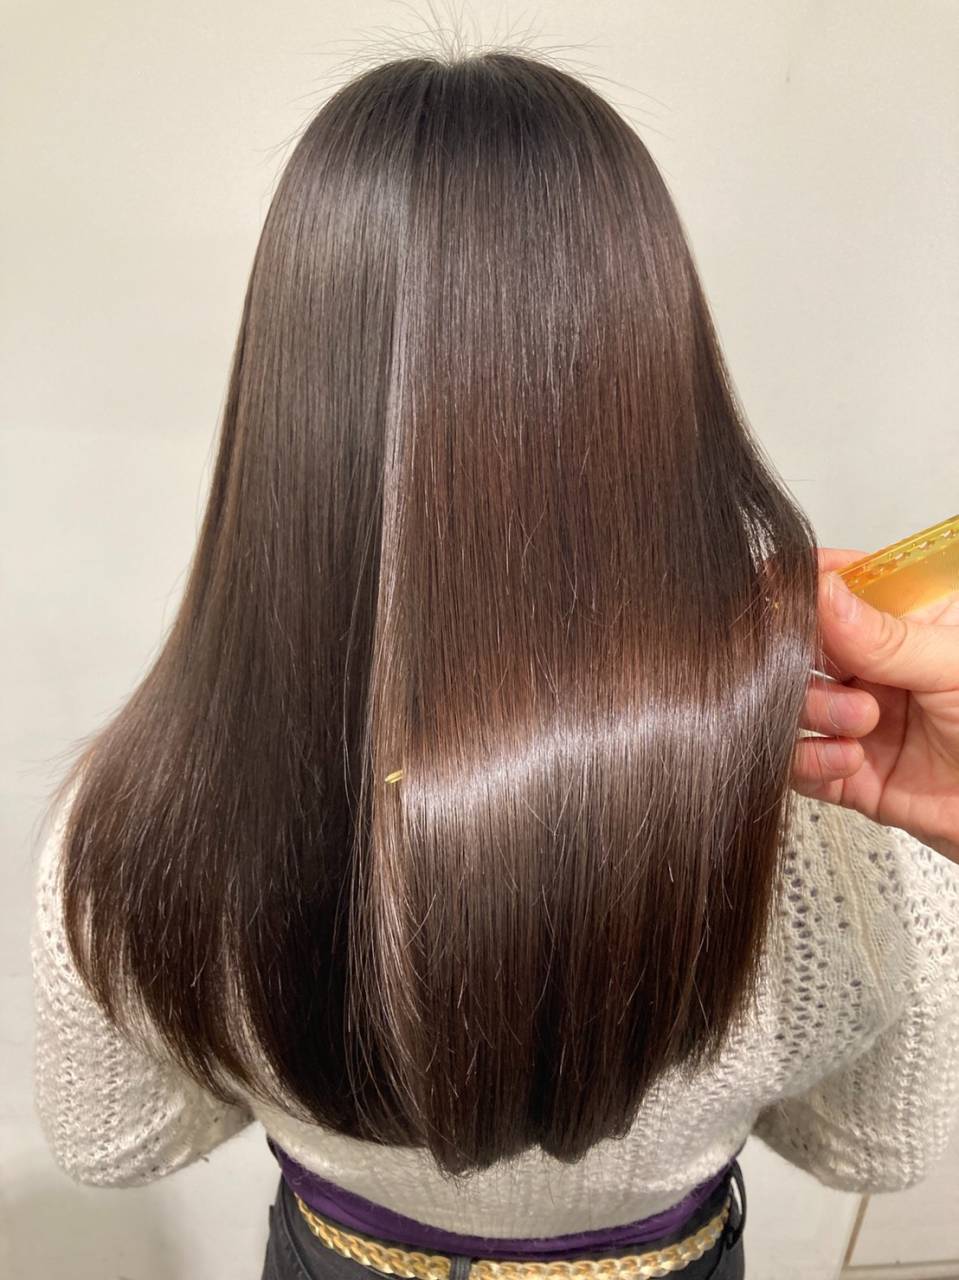 [Nagoya x Hair Improvement Treatment] I want to get glossy hair that can withstand the rainy season this year! How to make strong hair even in the rainy season?